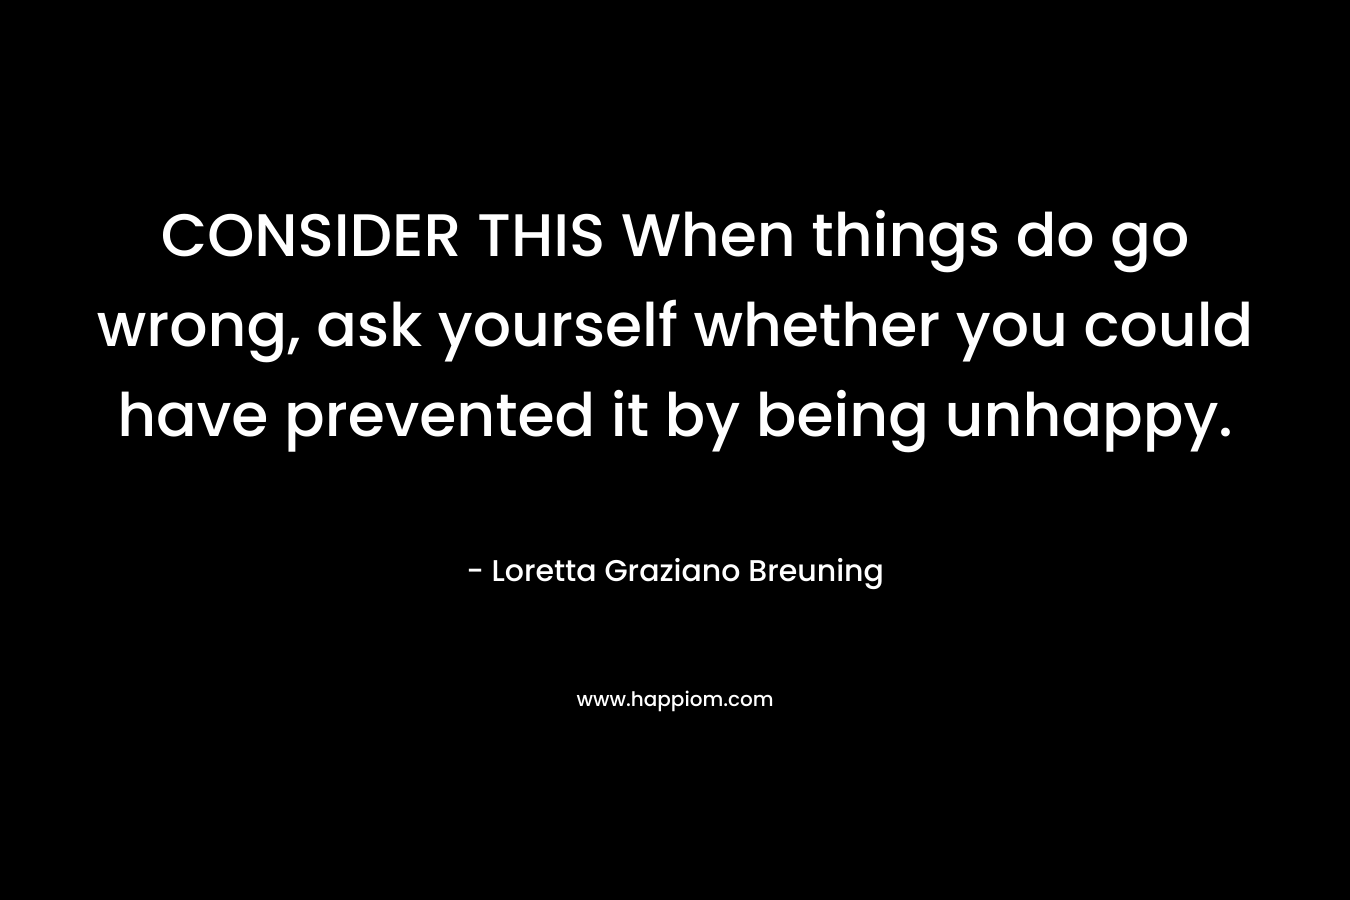 CONSIDER THIS When things do go wrong, ask yourself whether you could have prevented it by being unhappy.